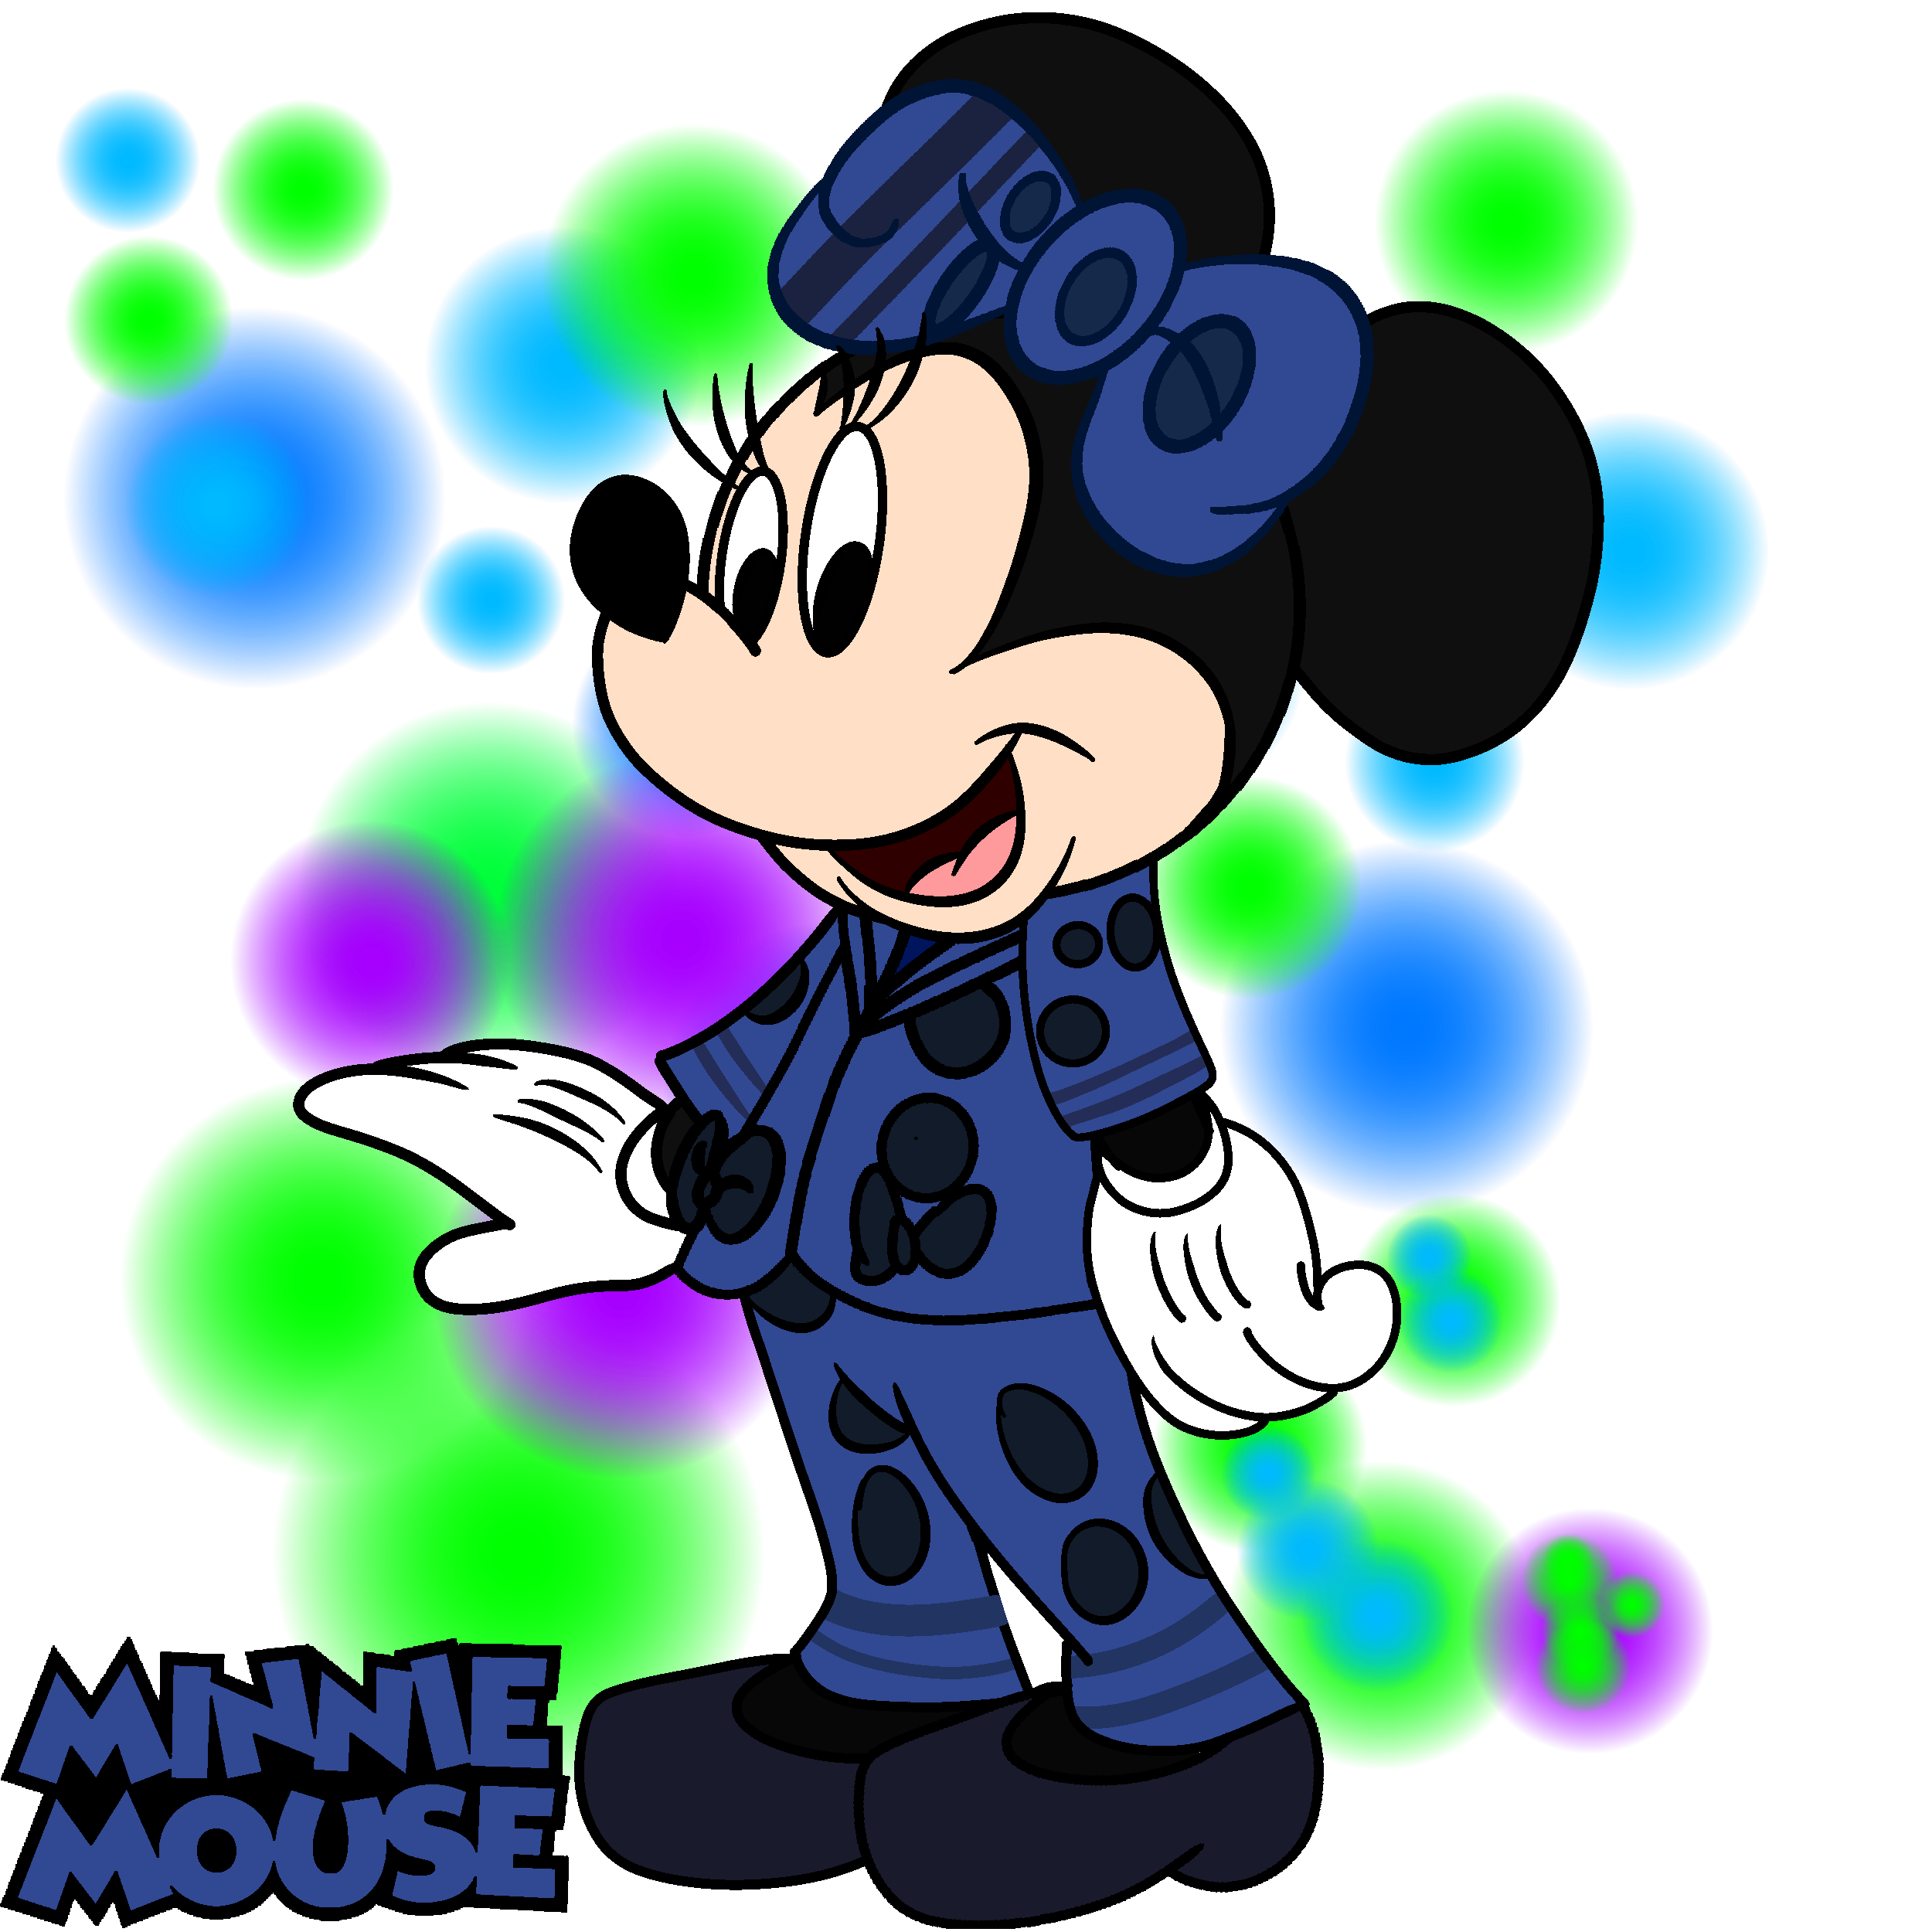 Minnie mouse with pants by fanvideogames on DeviantArt